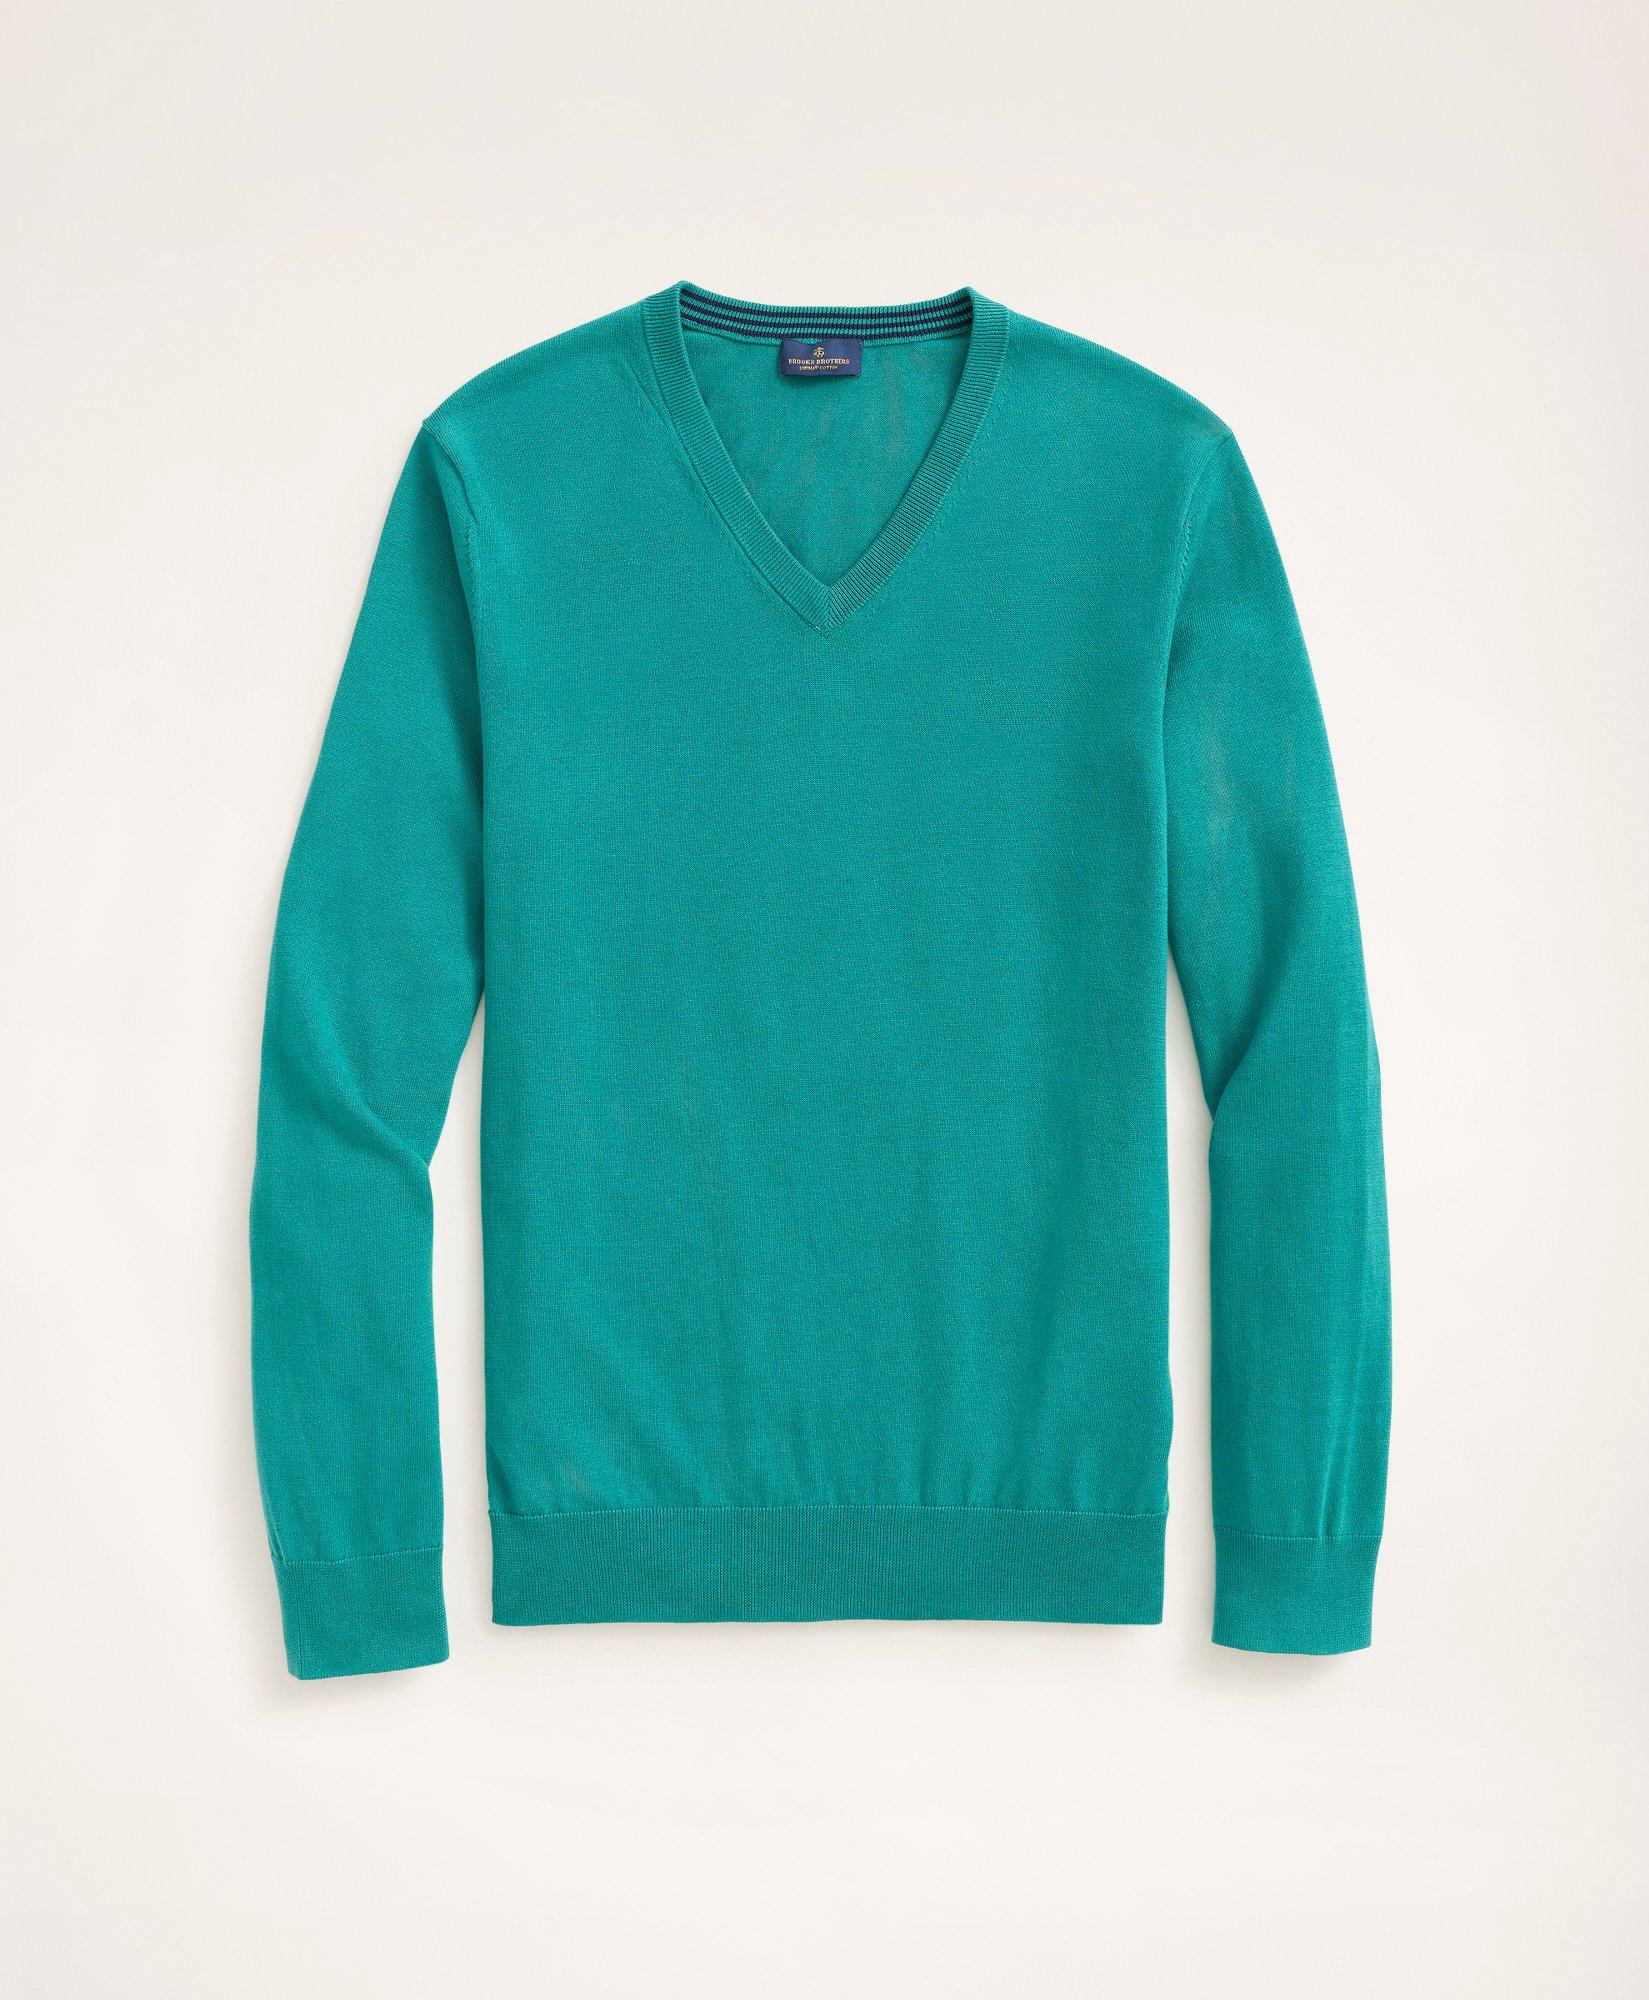 Brooks Brothers Big & Tall Supima Cotton V-neck Sweater | Teal | Size 2x